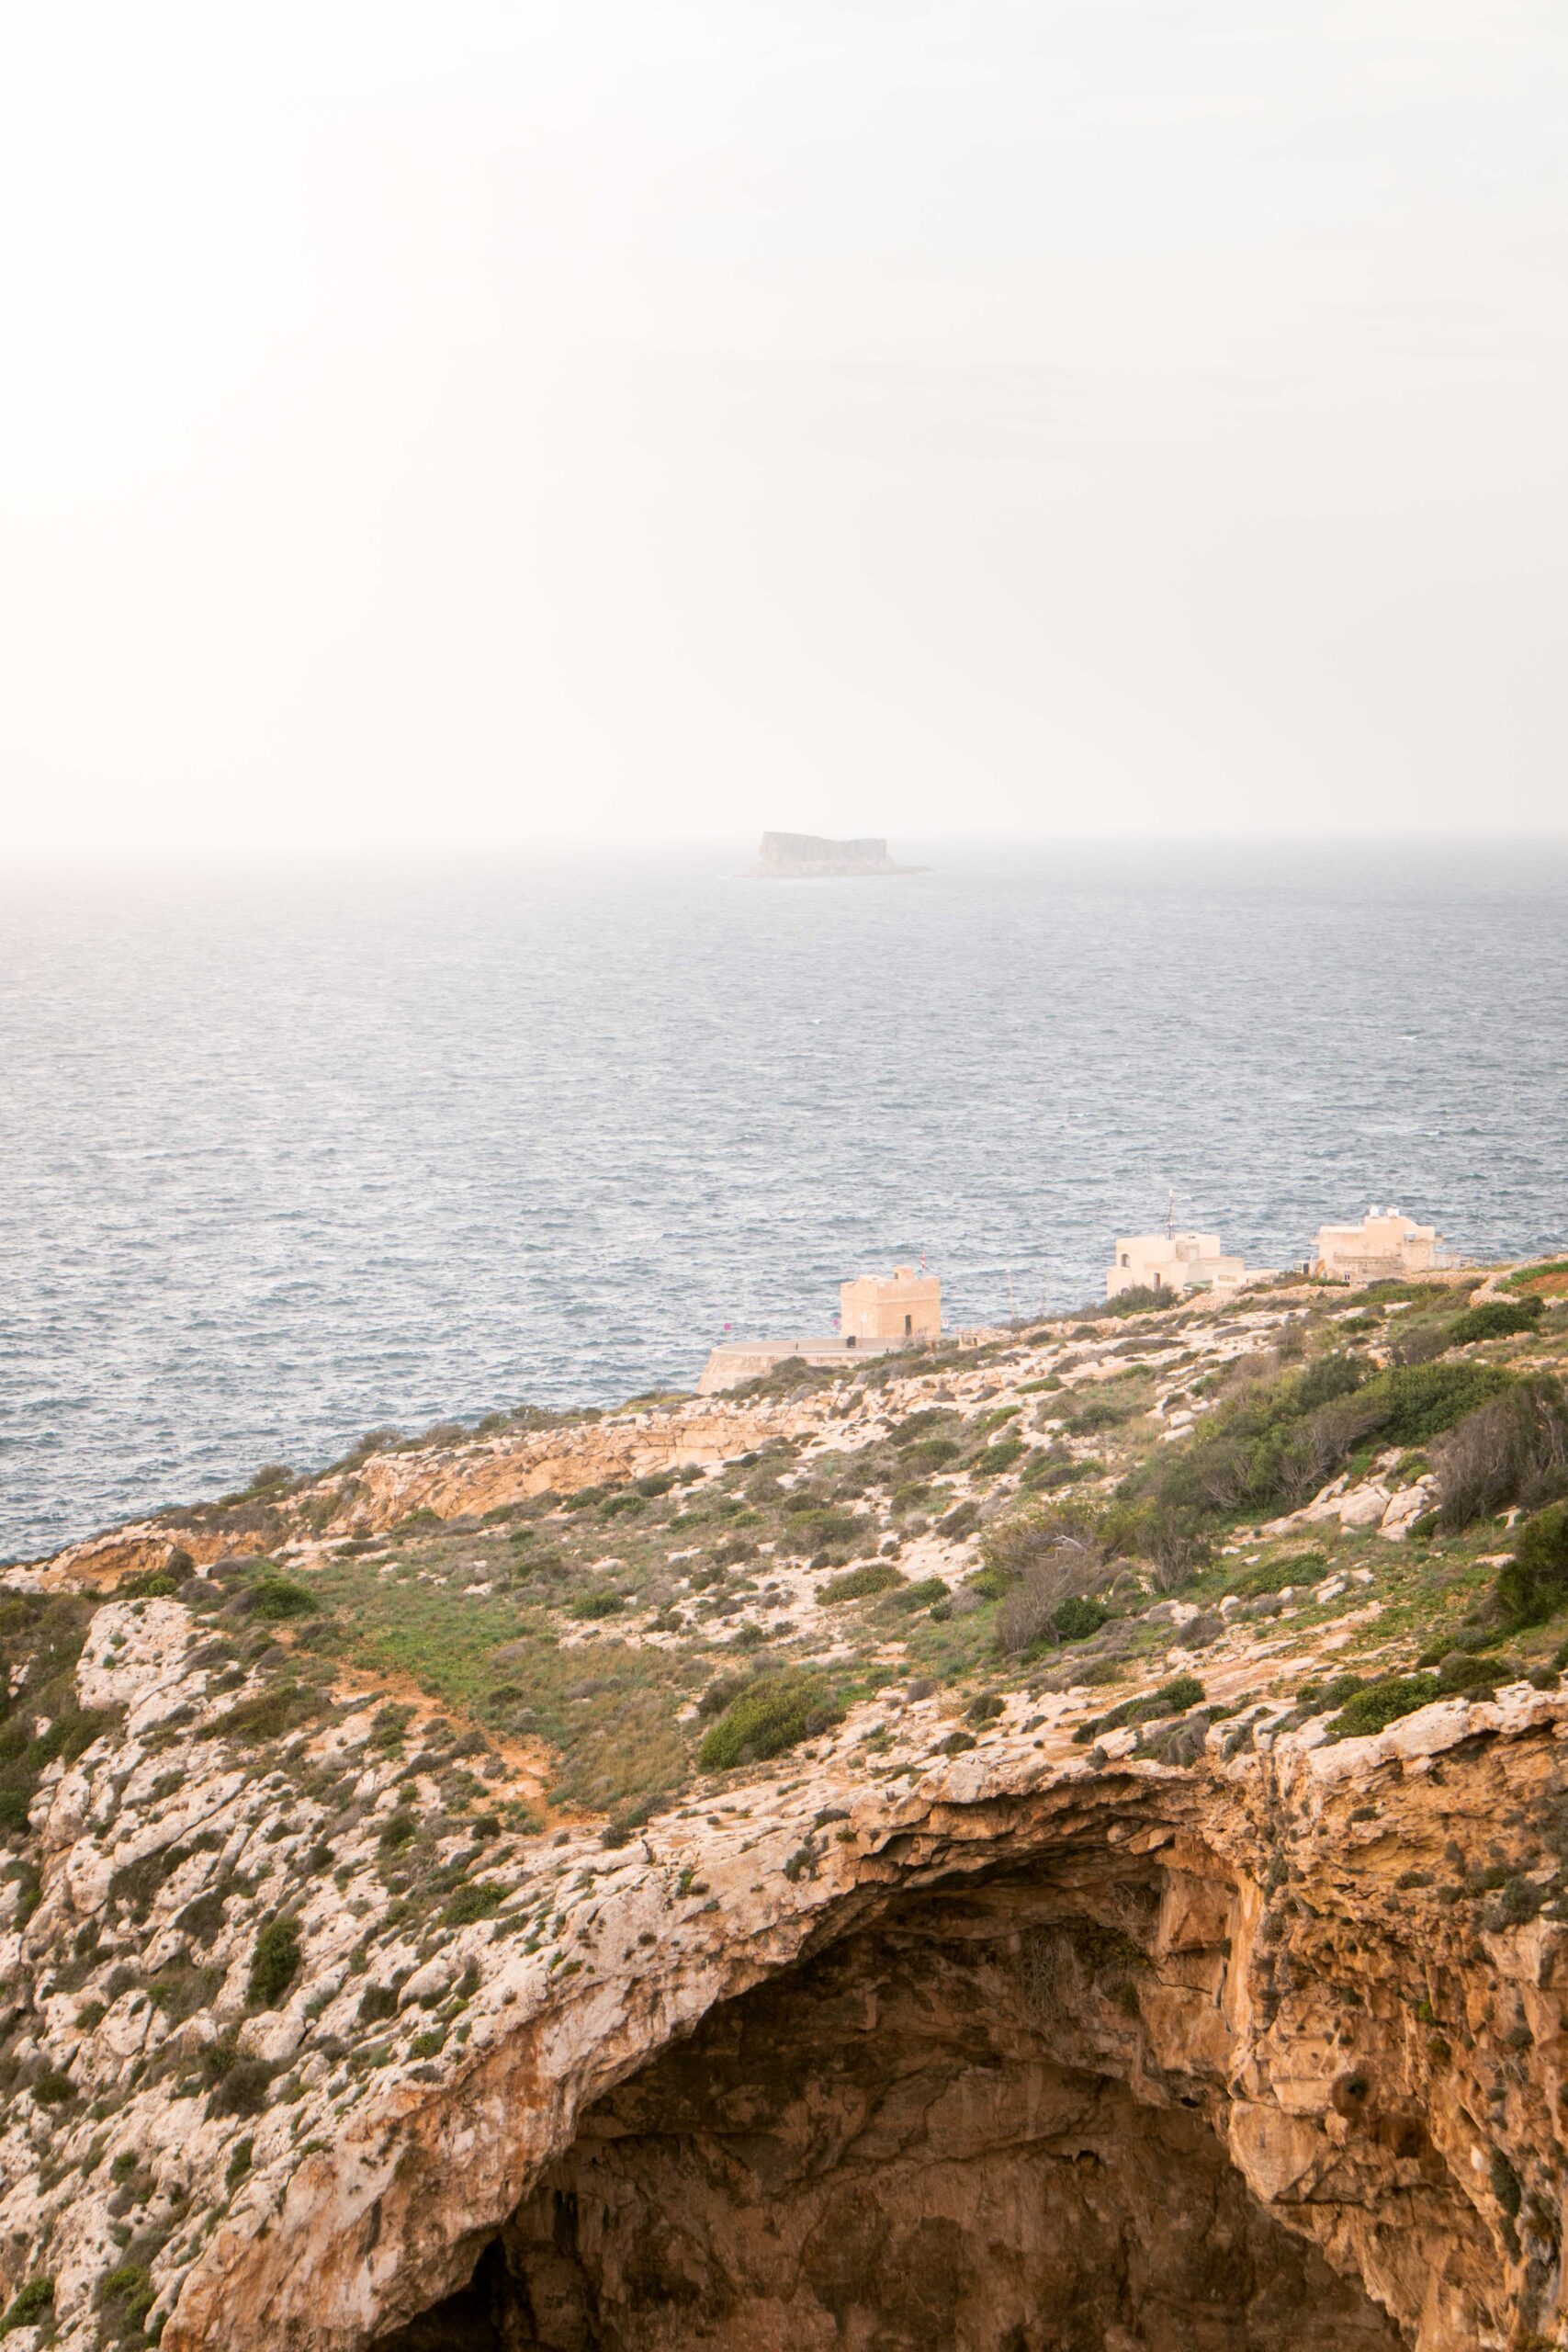 Top of the Blue Grotto and distant Filfla islet as seen from the Blue Wall and Grotto Viewpoint in Wied Iż-Żurrieq, Malta